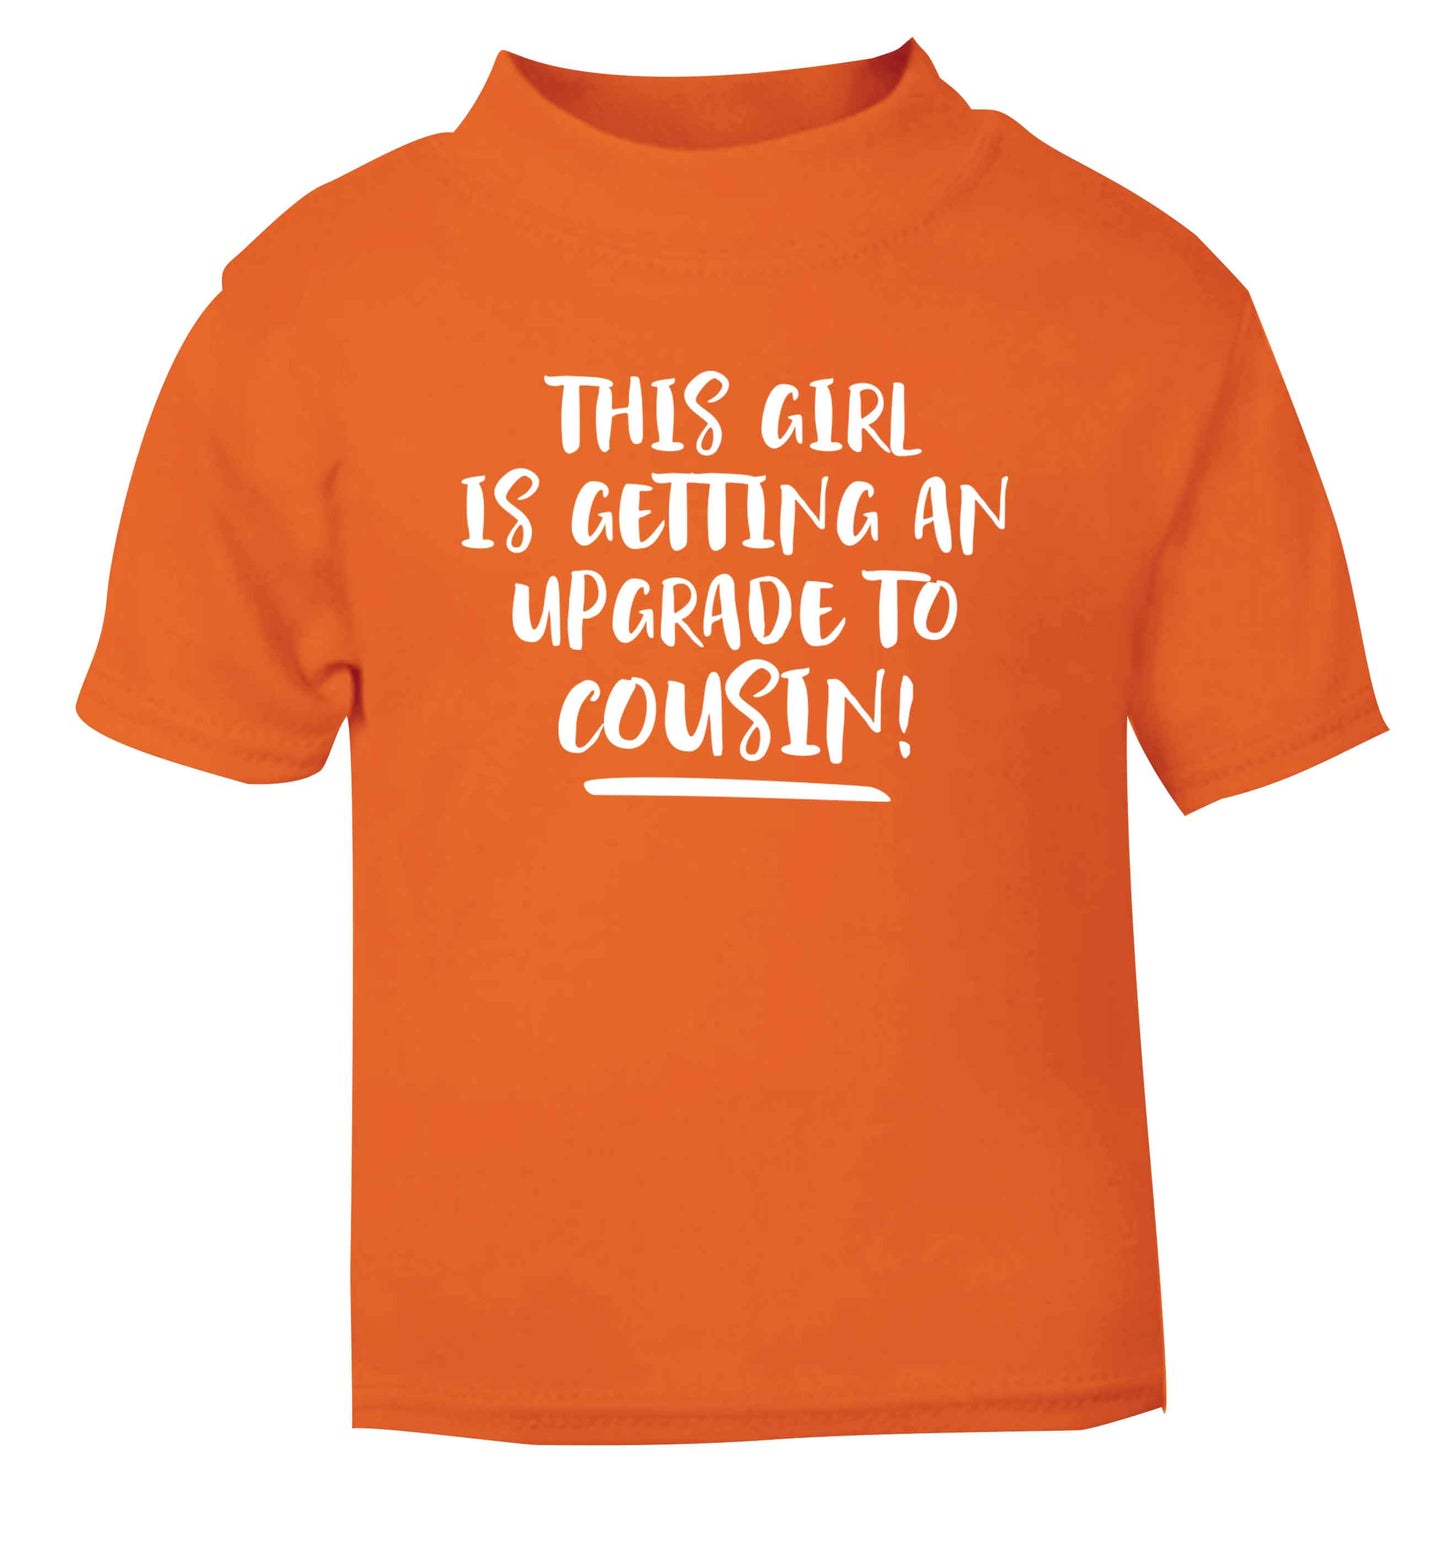 This girl is getting an upgrade to cousin! orange Baby Toddler Tshirt 2 Years